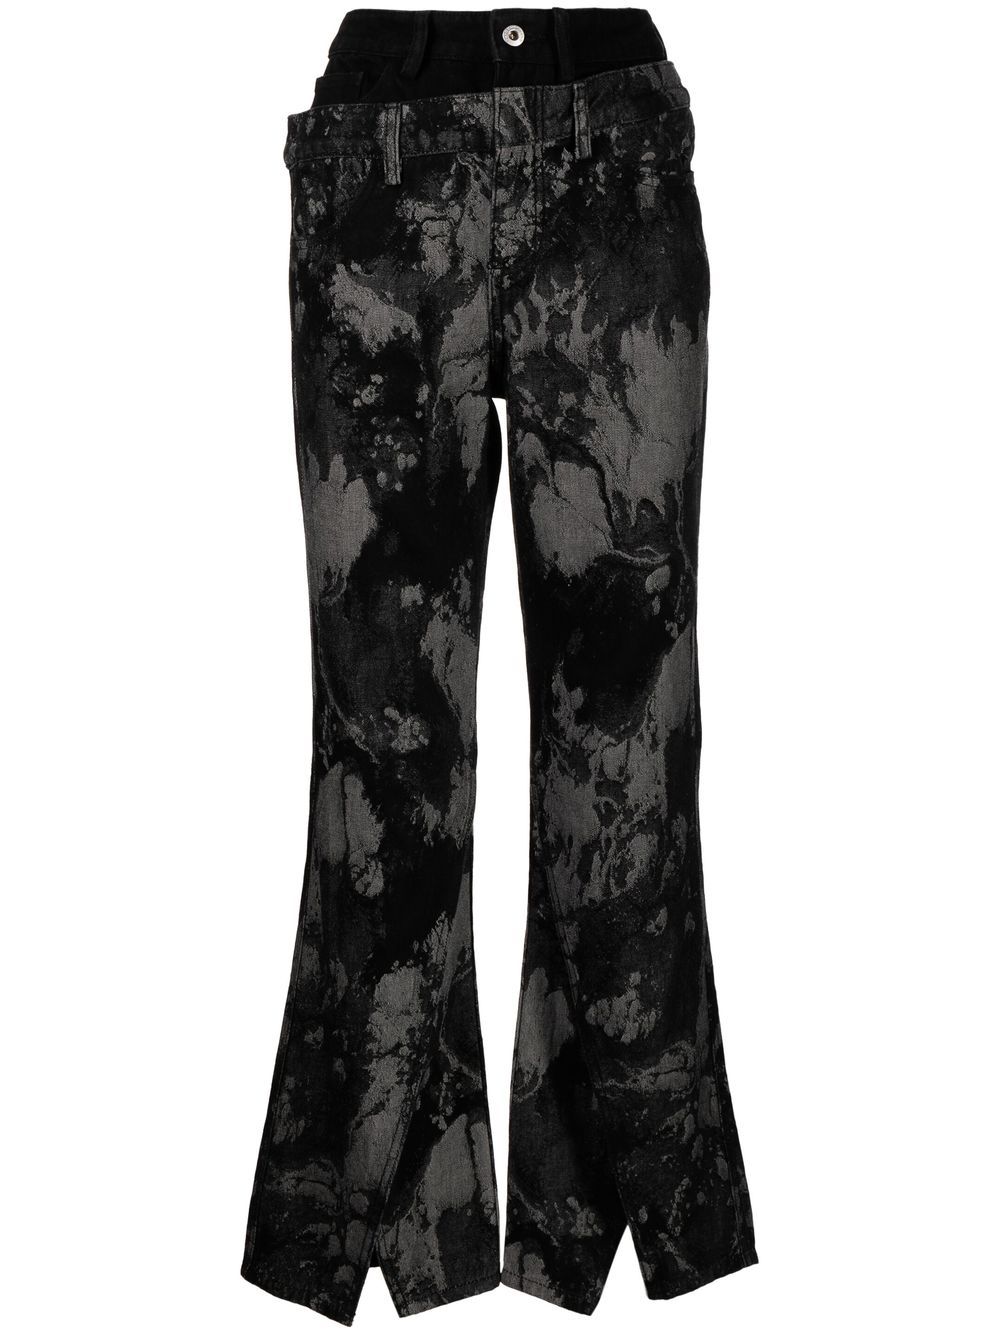 Feng Chen Wang embroidered double-waisted flared jeans - Black von Feng Chen Wang